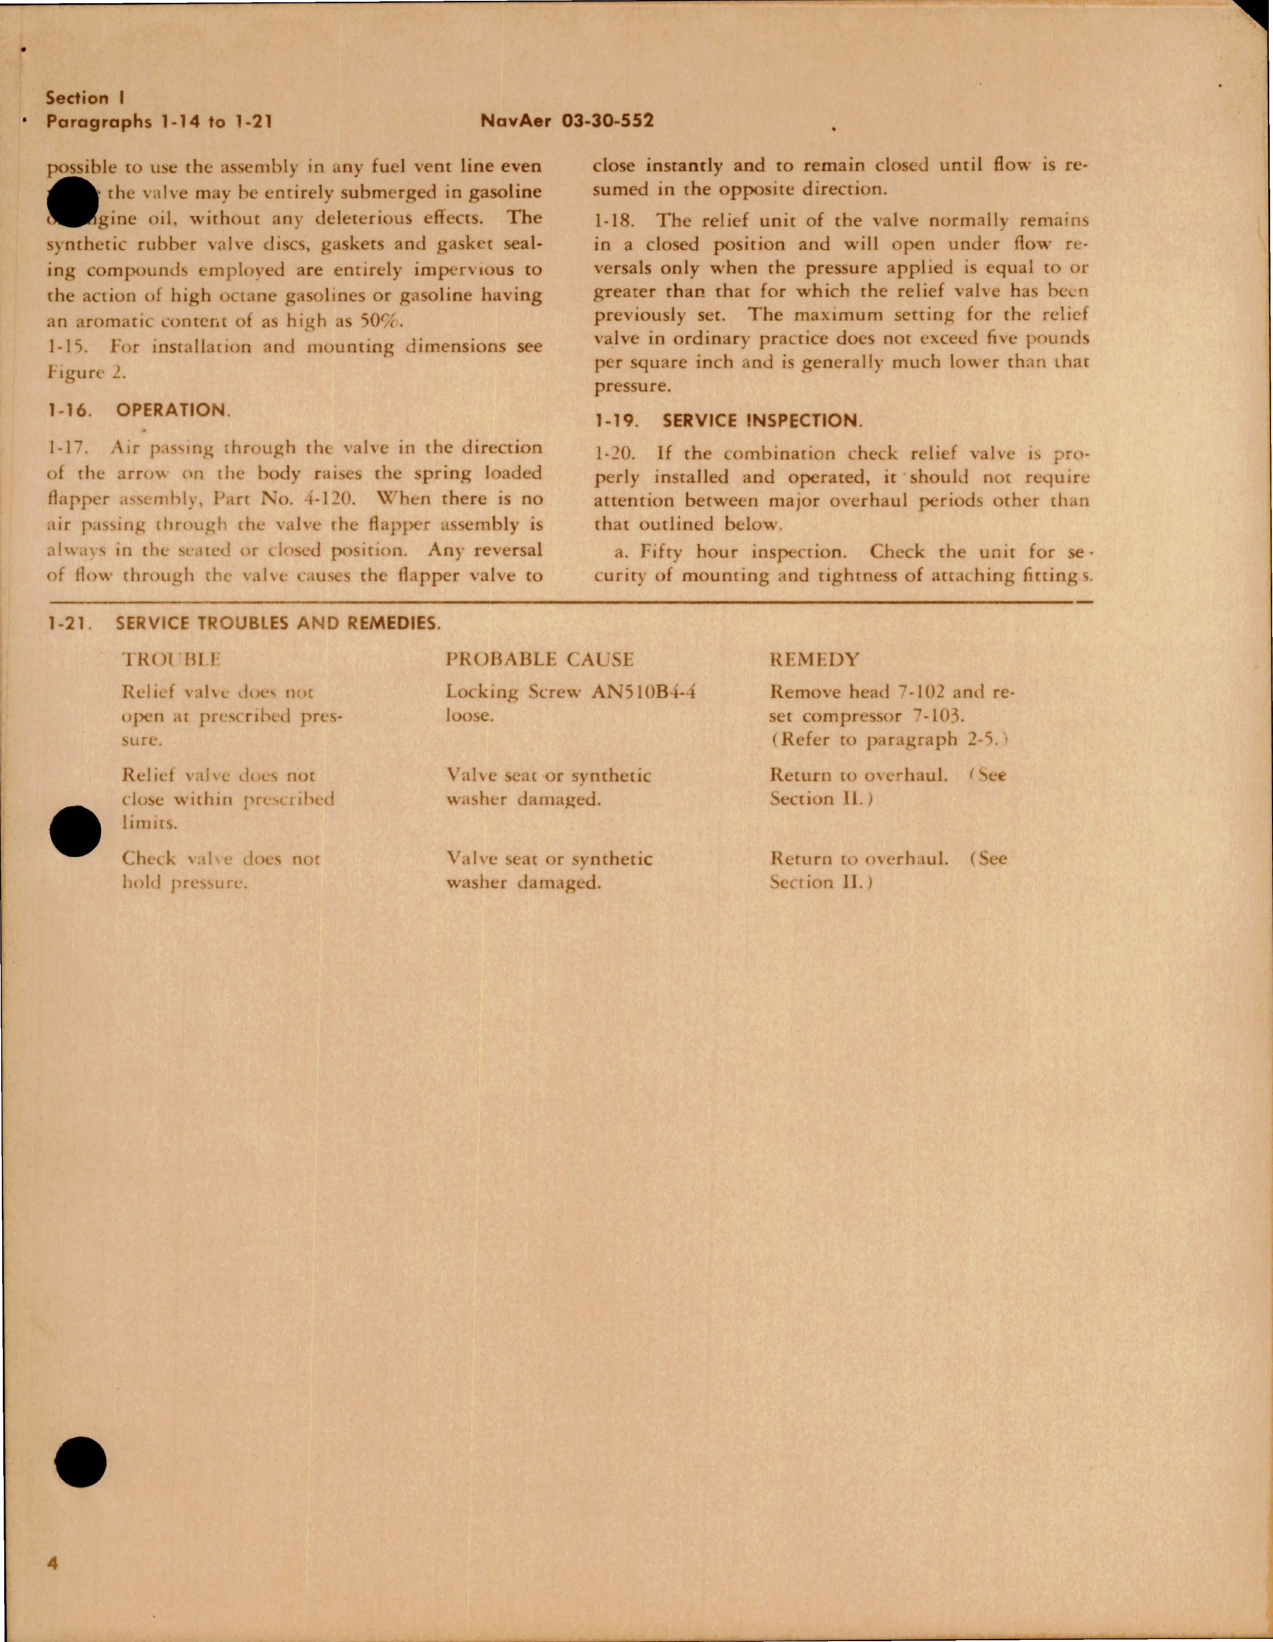 Sample page 5 from AirCorps Library document: Operation, Service and Overhaul Instructions with Parts for Combination Check Relief Valve - Model 4-2500-3 